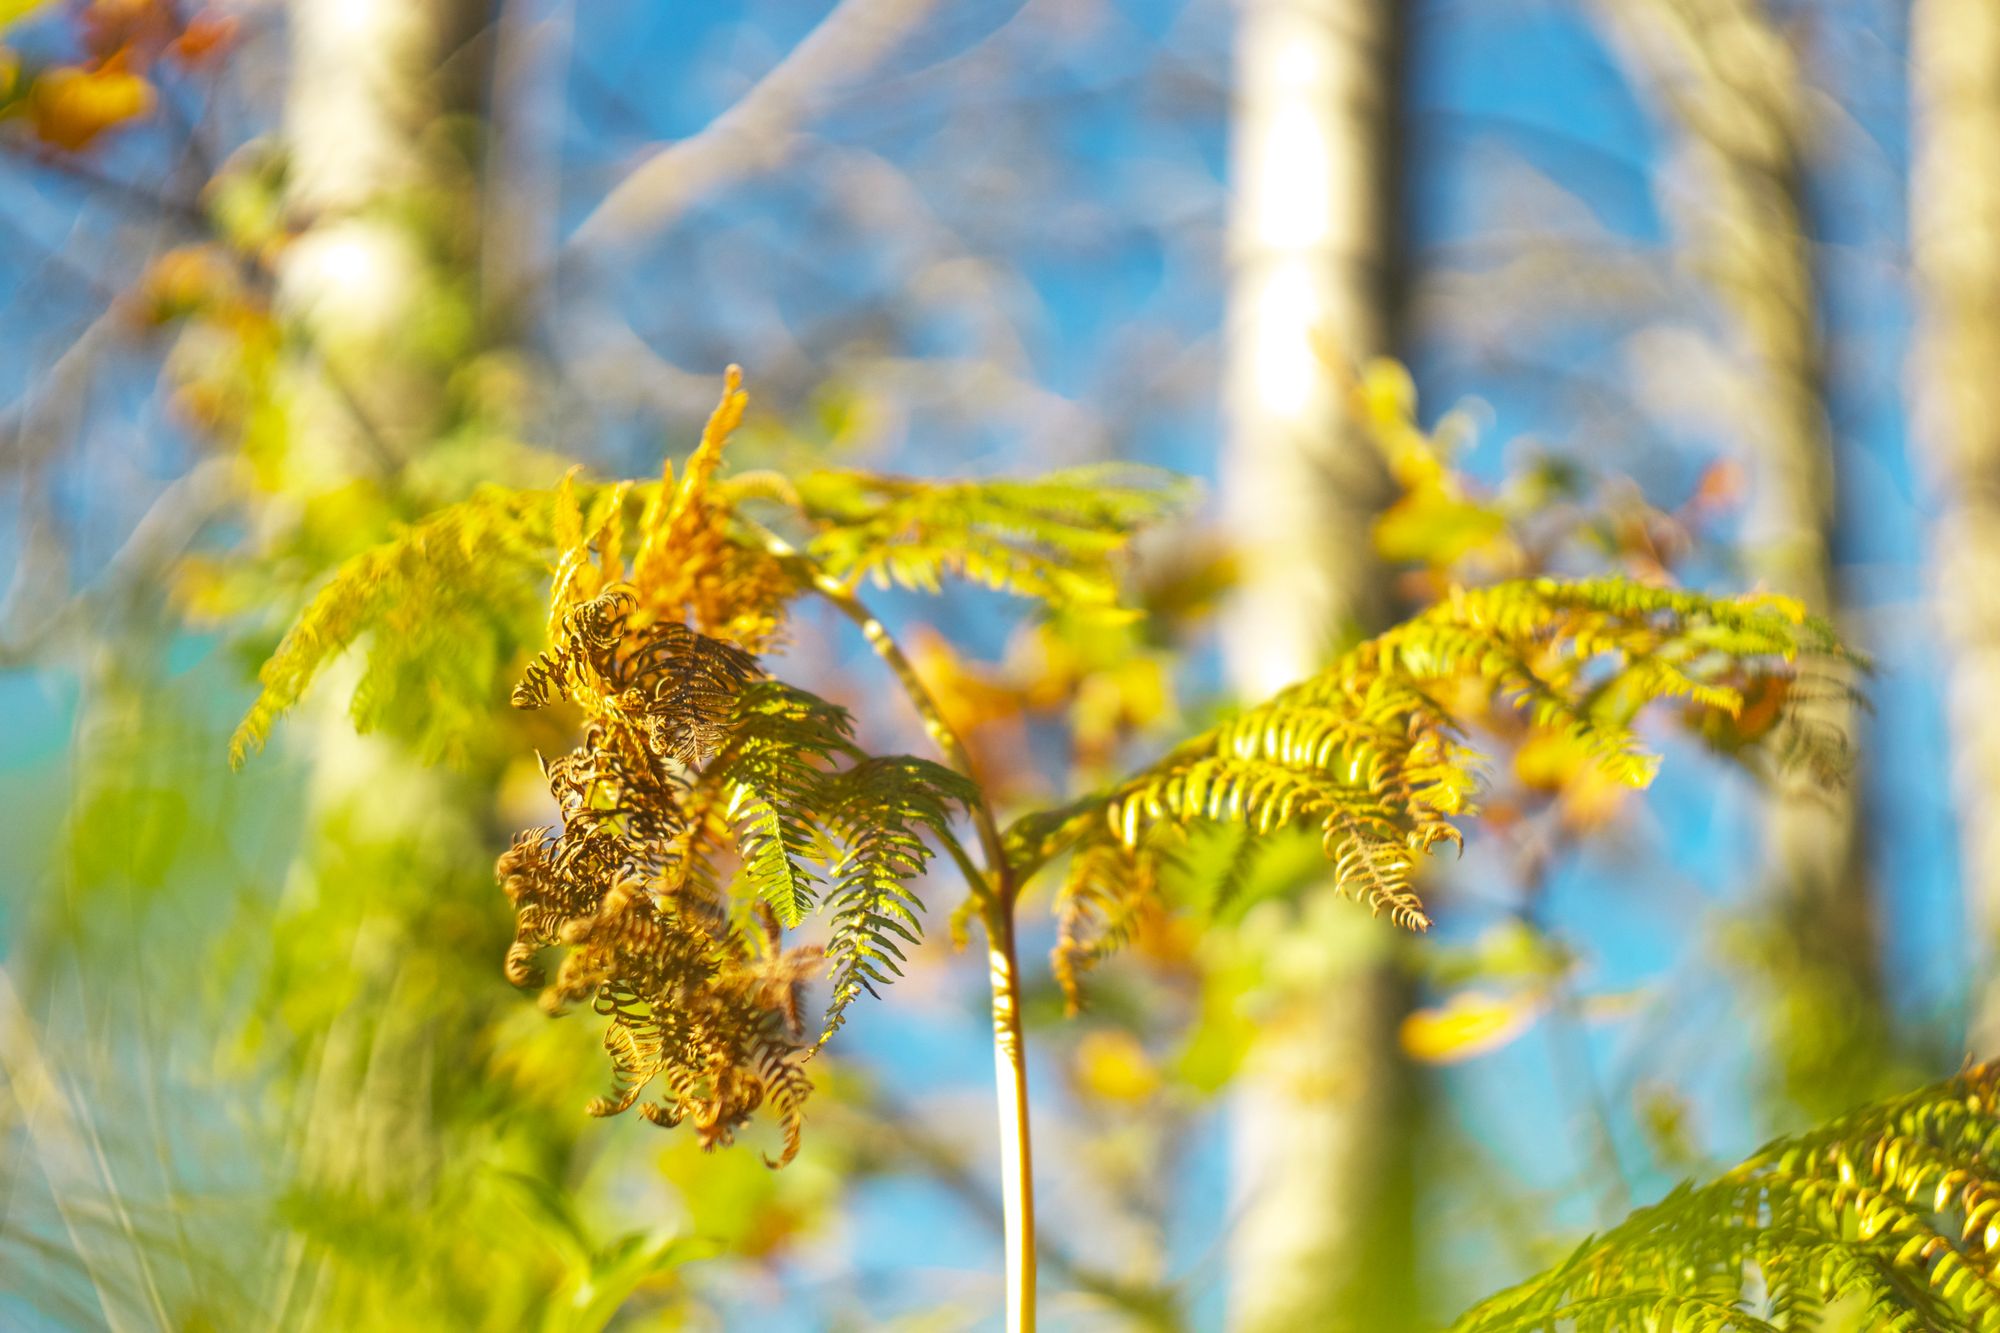 A fern on a long stem with golden green-yellow foliage turning brown and shrivelling. Behind, bare trees blur against a bright blue sky.